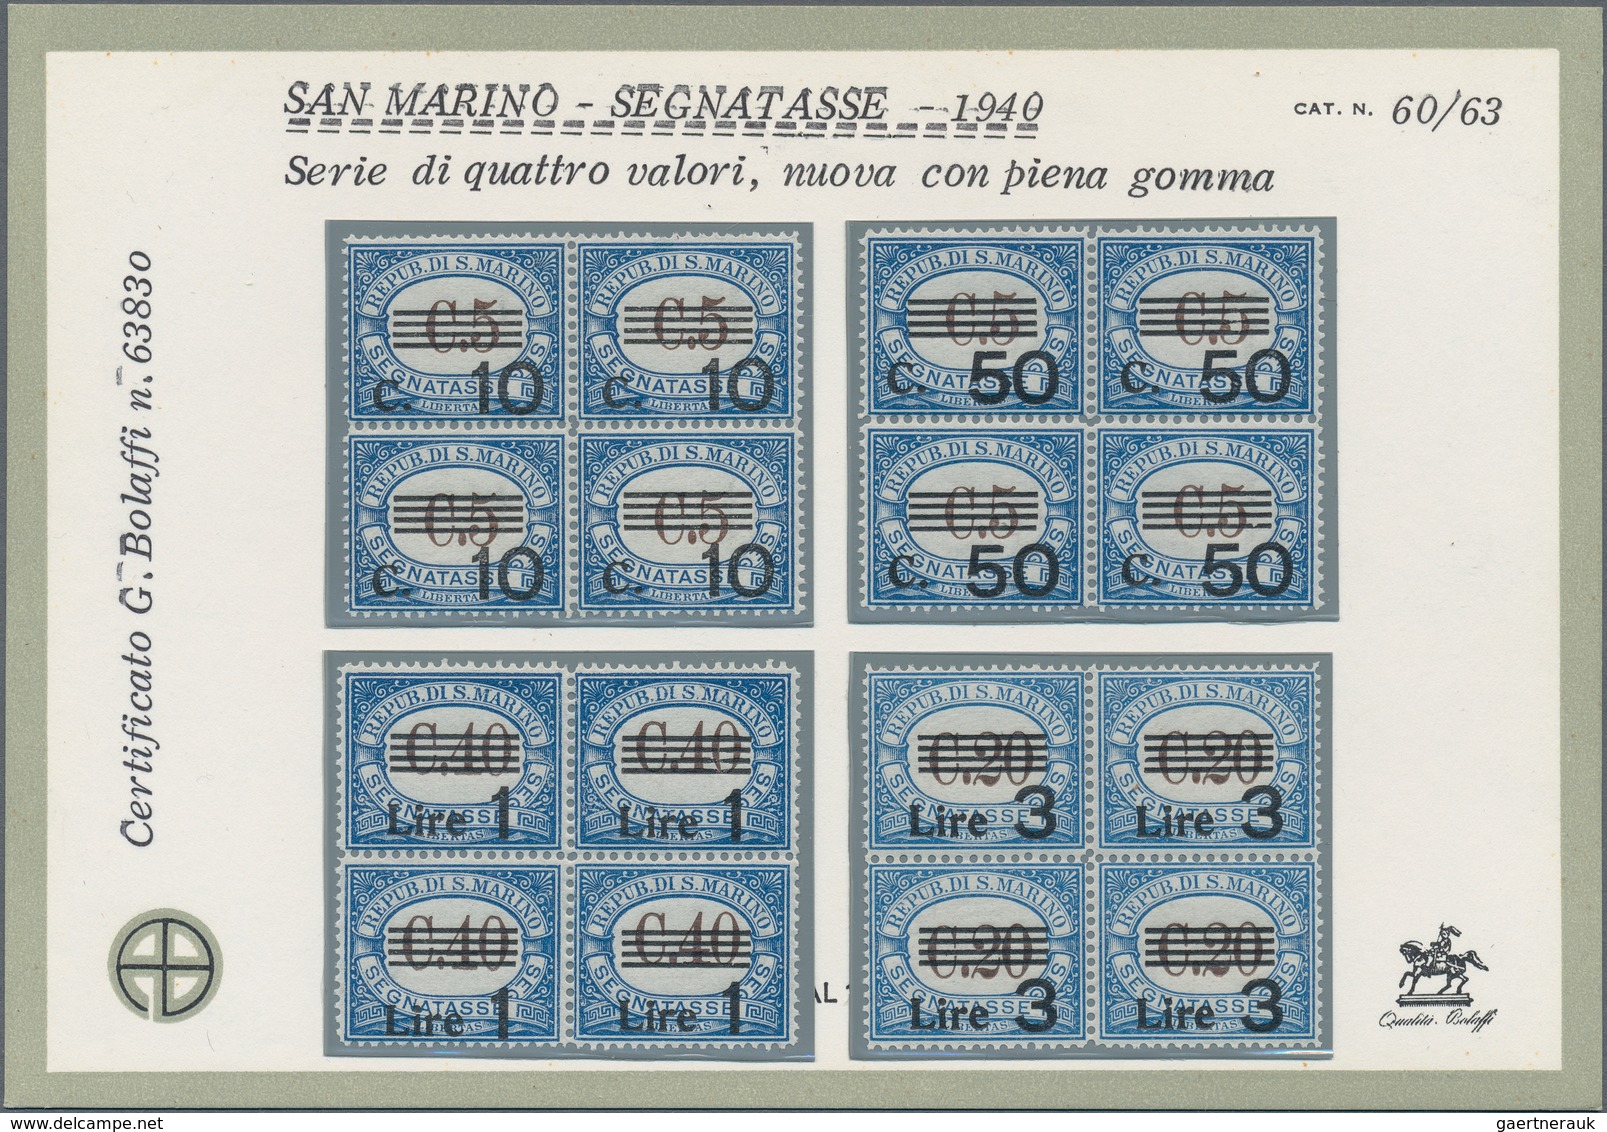 San Marino - Portomarken: 1940, Postage Due, Sassone 60-63 Well Centred Mint Never Hinged In Blocks - Postage Due